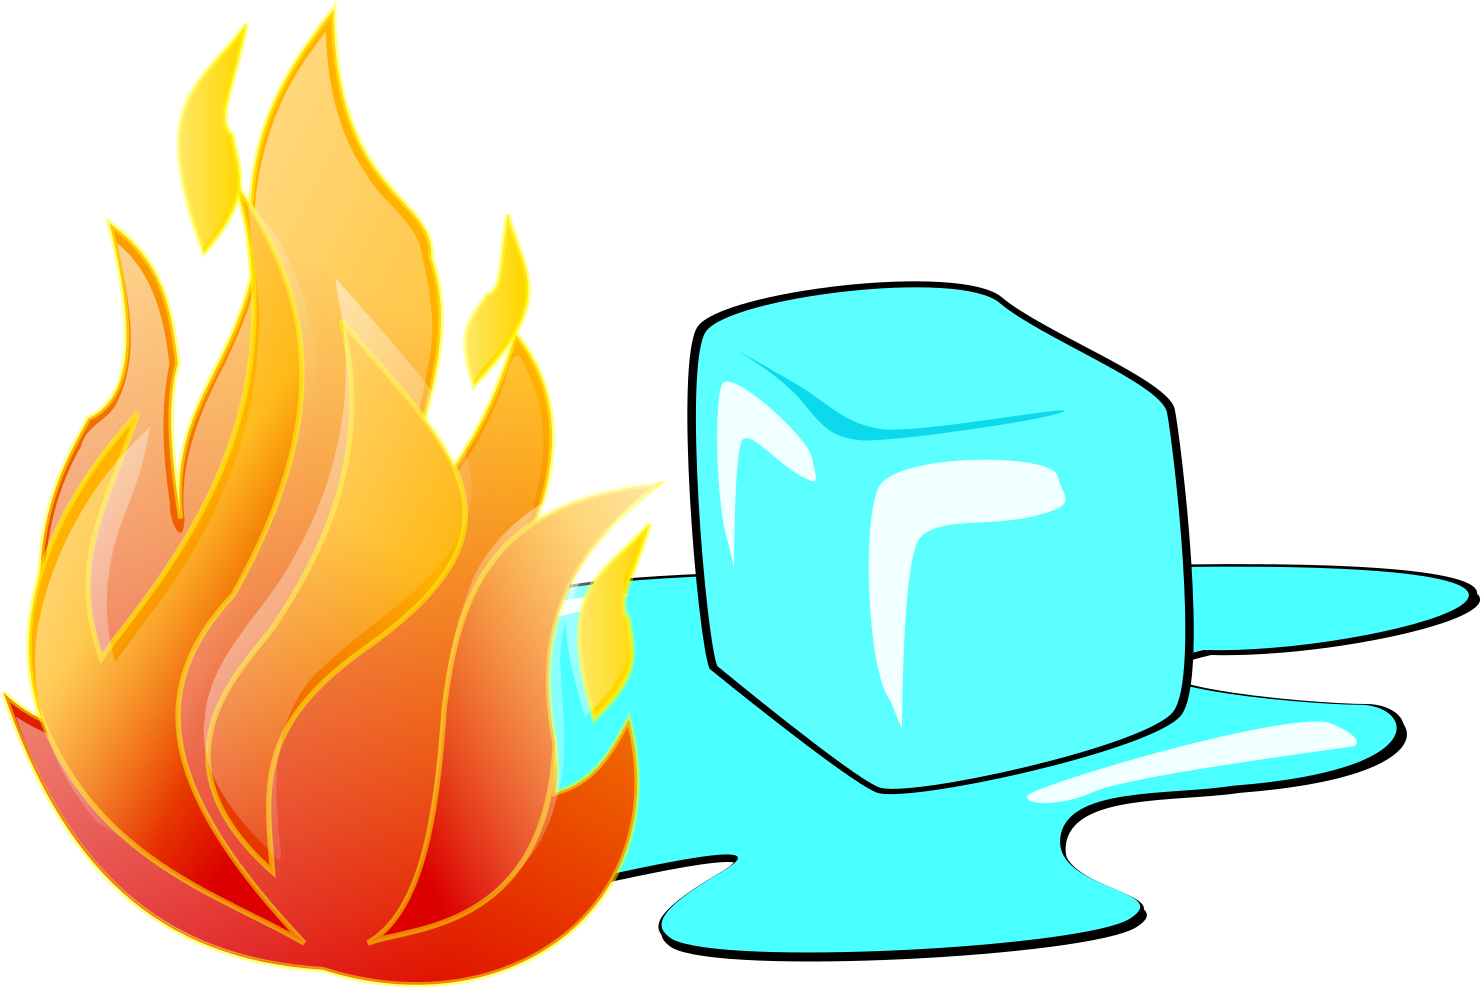 Fireand Ice Cube Illustration PNG